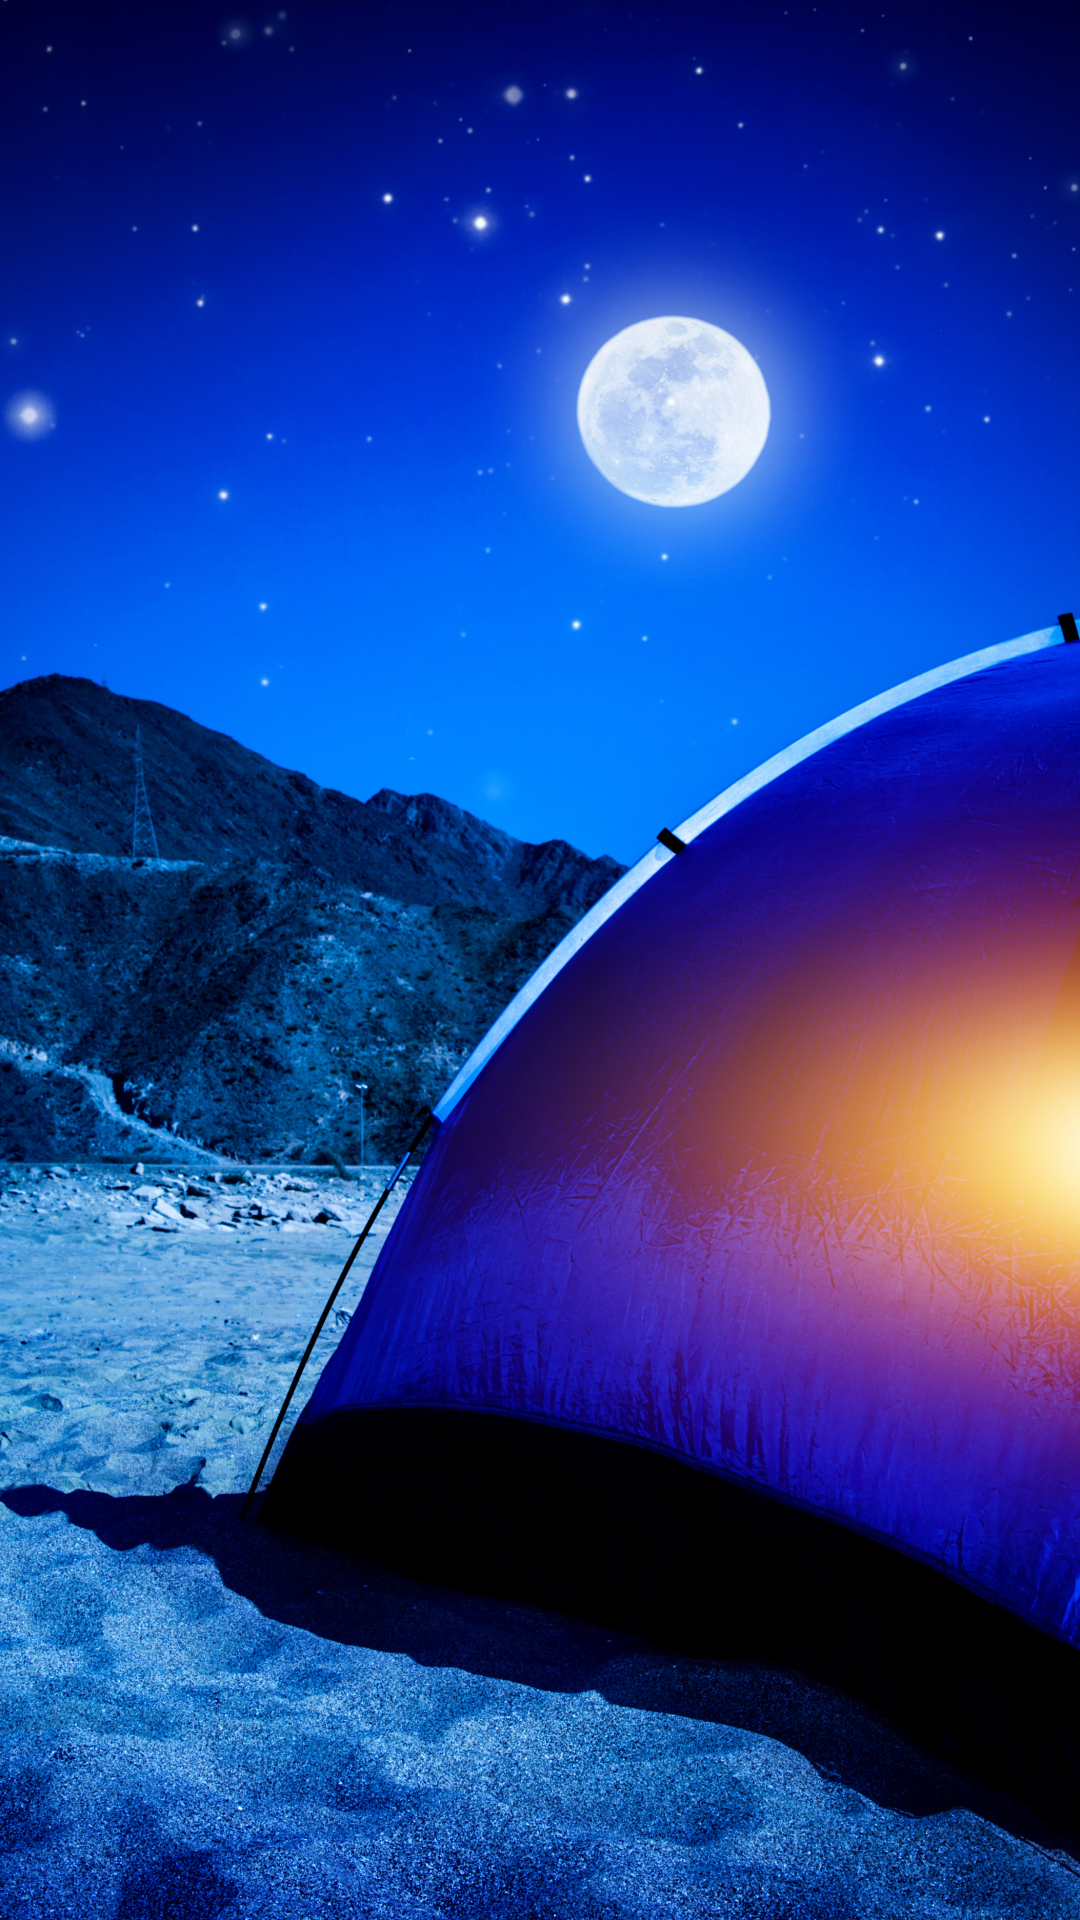 camping, photography, camp, tent, moon, mountain, sand, night